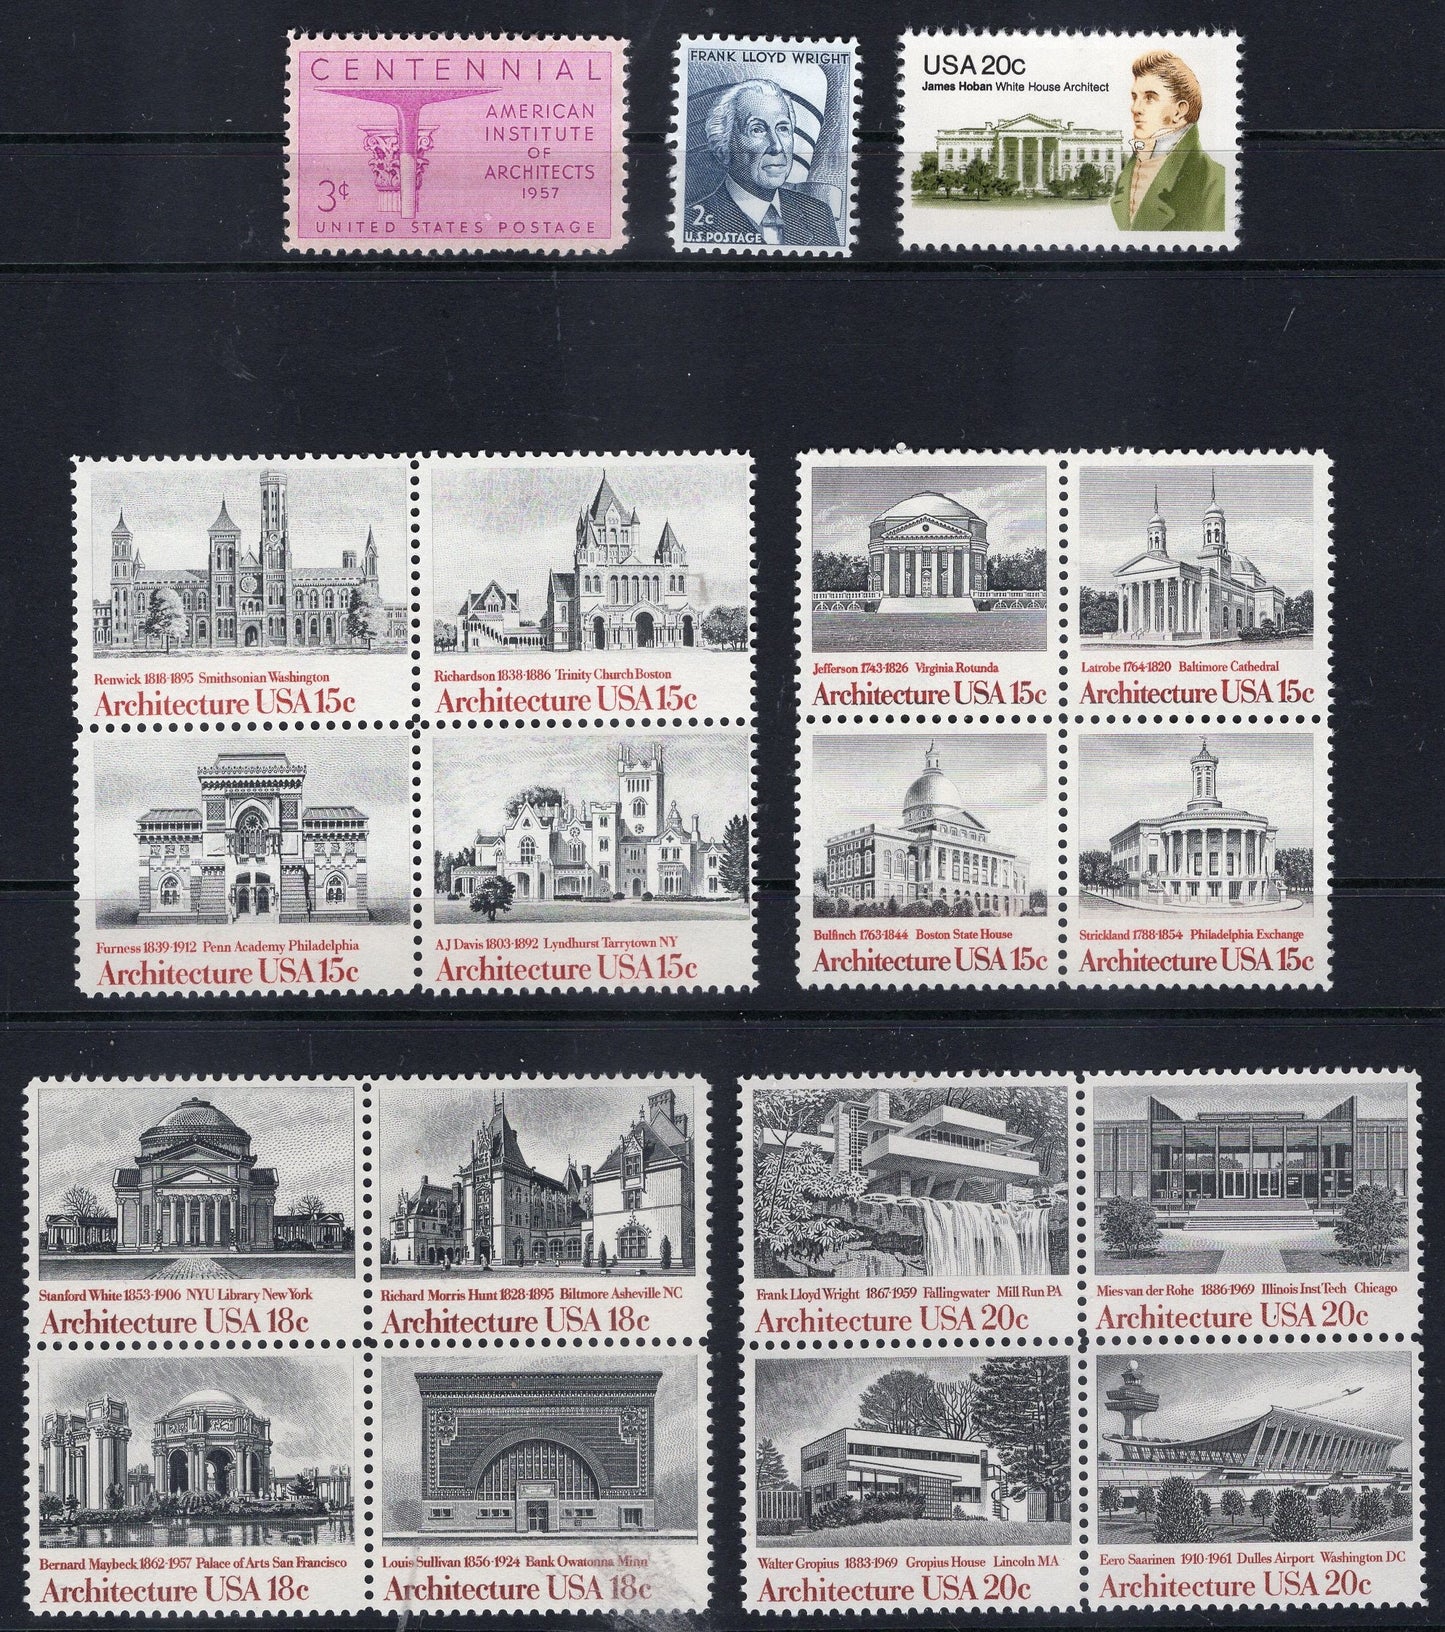 AMERICAN ARCHITECTURE AIA Theme Collection Issued in 1957//1982 of 19 USA Stamps inc Fallingwater Wright Hoban Boston State